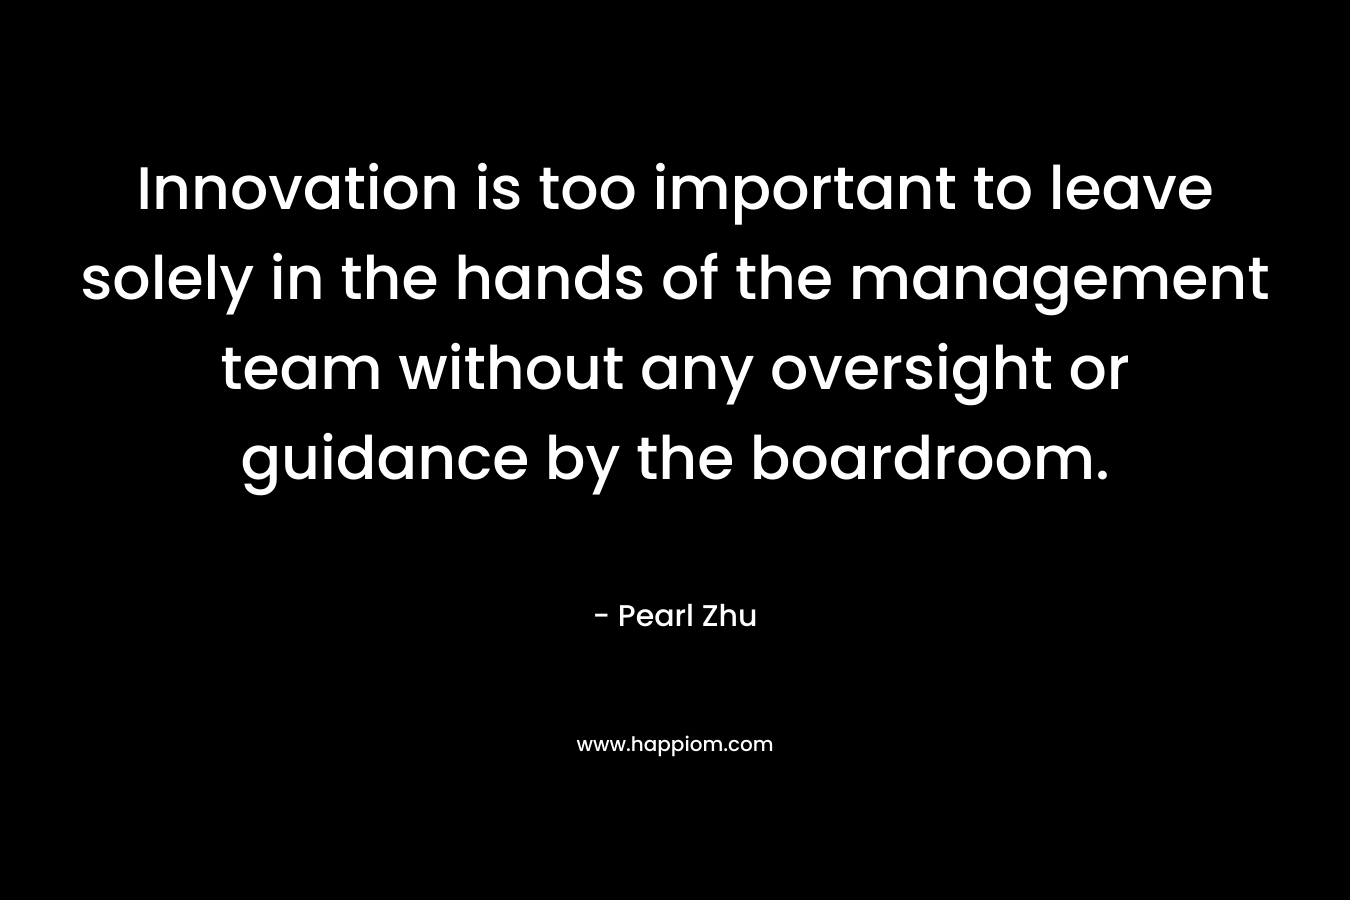 Innovation is too important to leave solely in the hands of the management team without any oversight or guidance by the boardroom. – Pearl Zhu